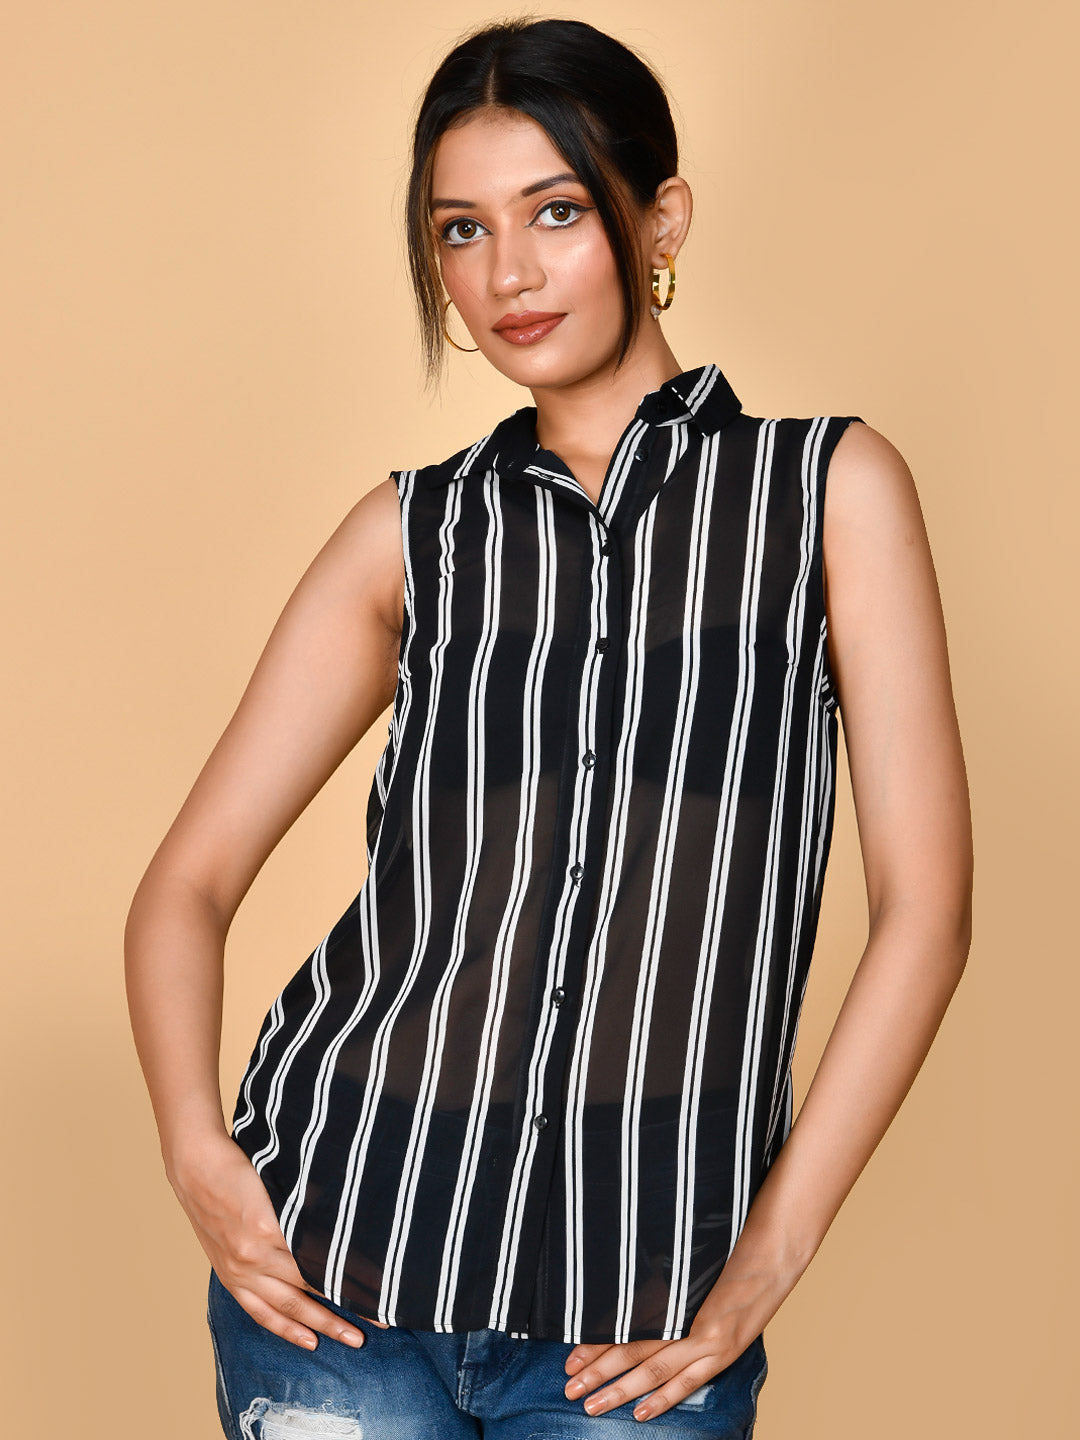 This Georgette Striped Sleeveless Shirt Top is a stylish and versatile addition to any wardrobe. Made from high-quality georgette, it offers lightweight and breathable comfort. The timeless striped design adds a touch of sophistication, making it perfect for both girls and women. Stay cool and classy in this must-have top.